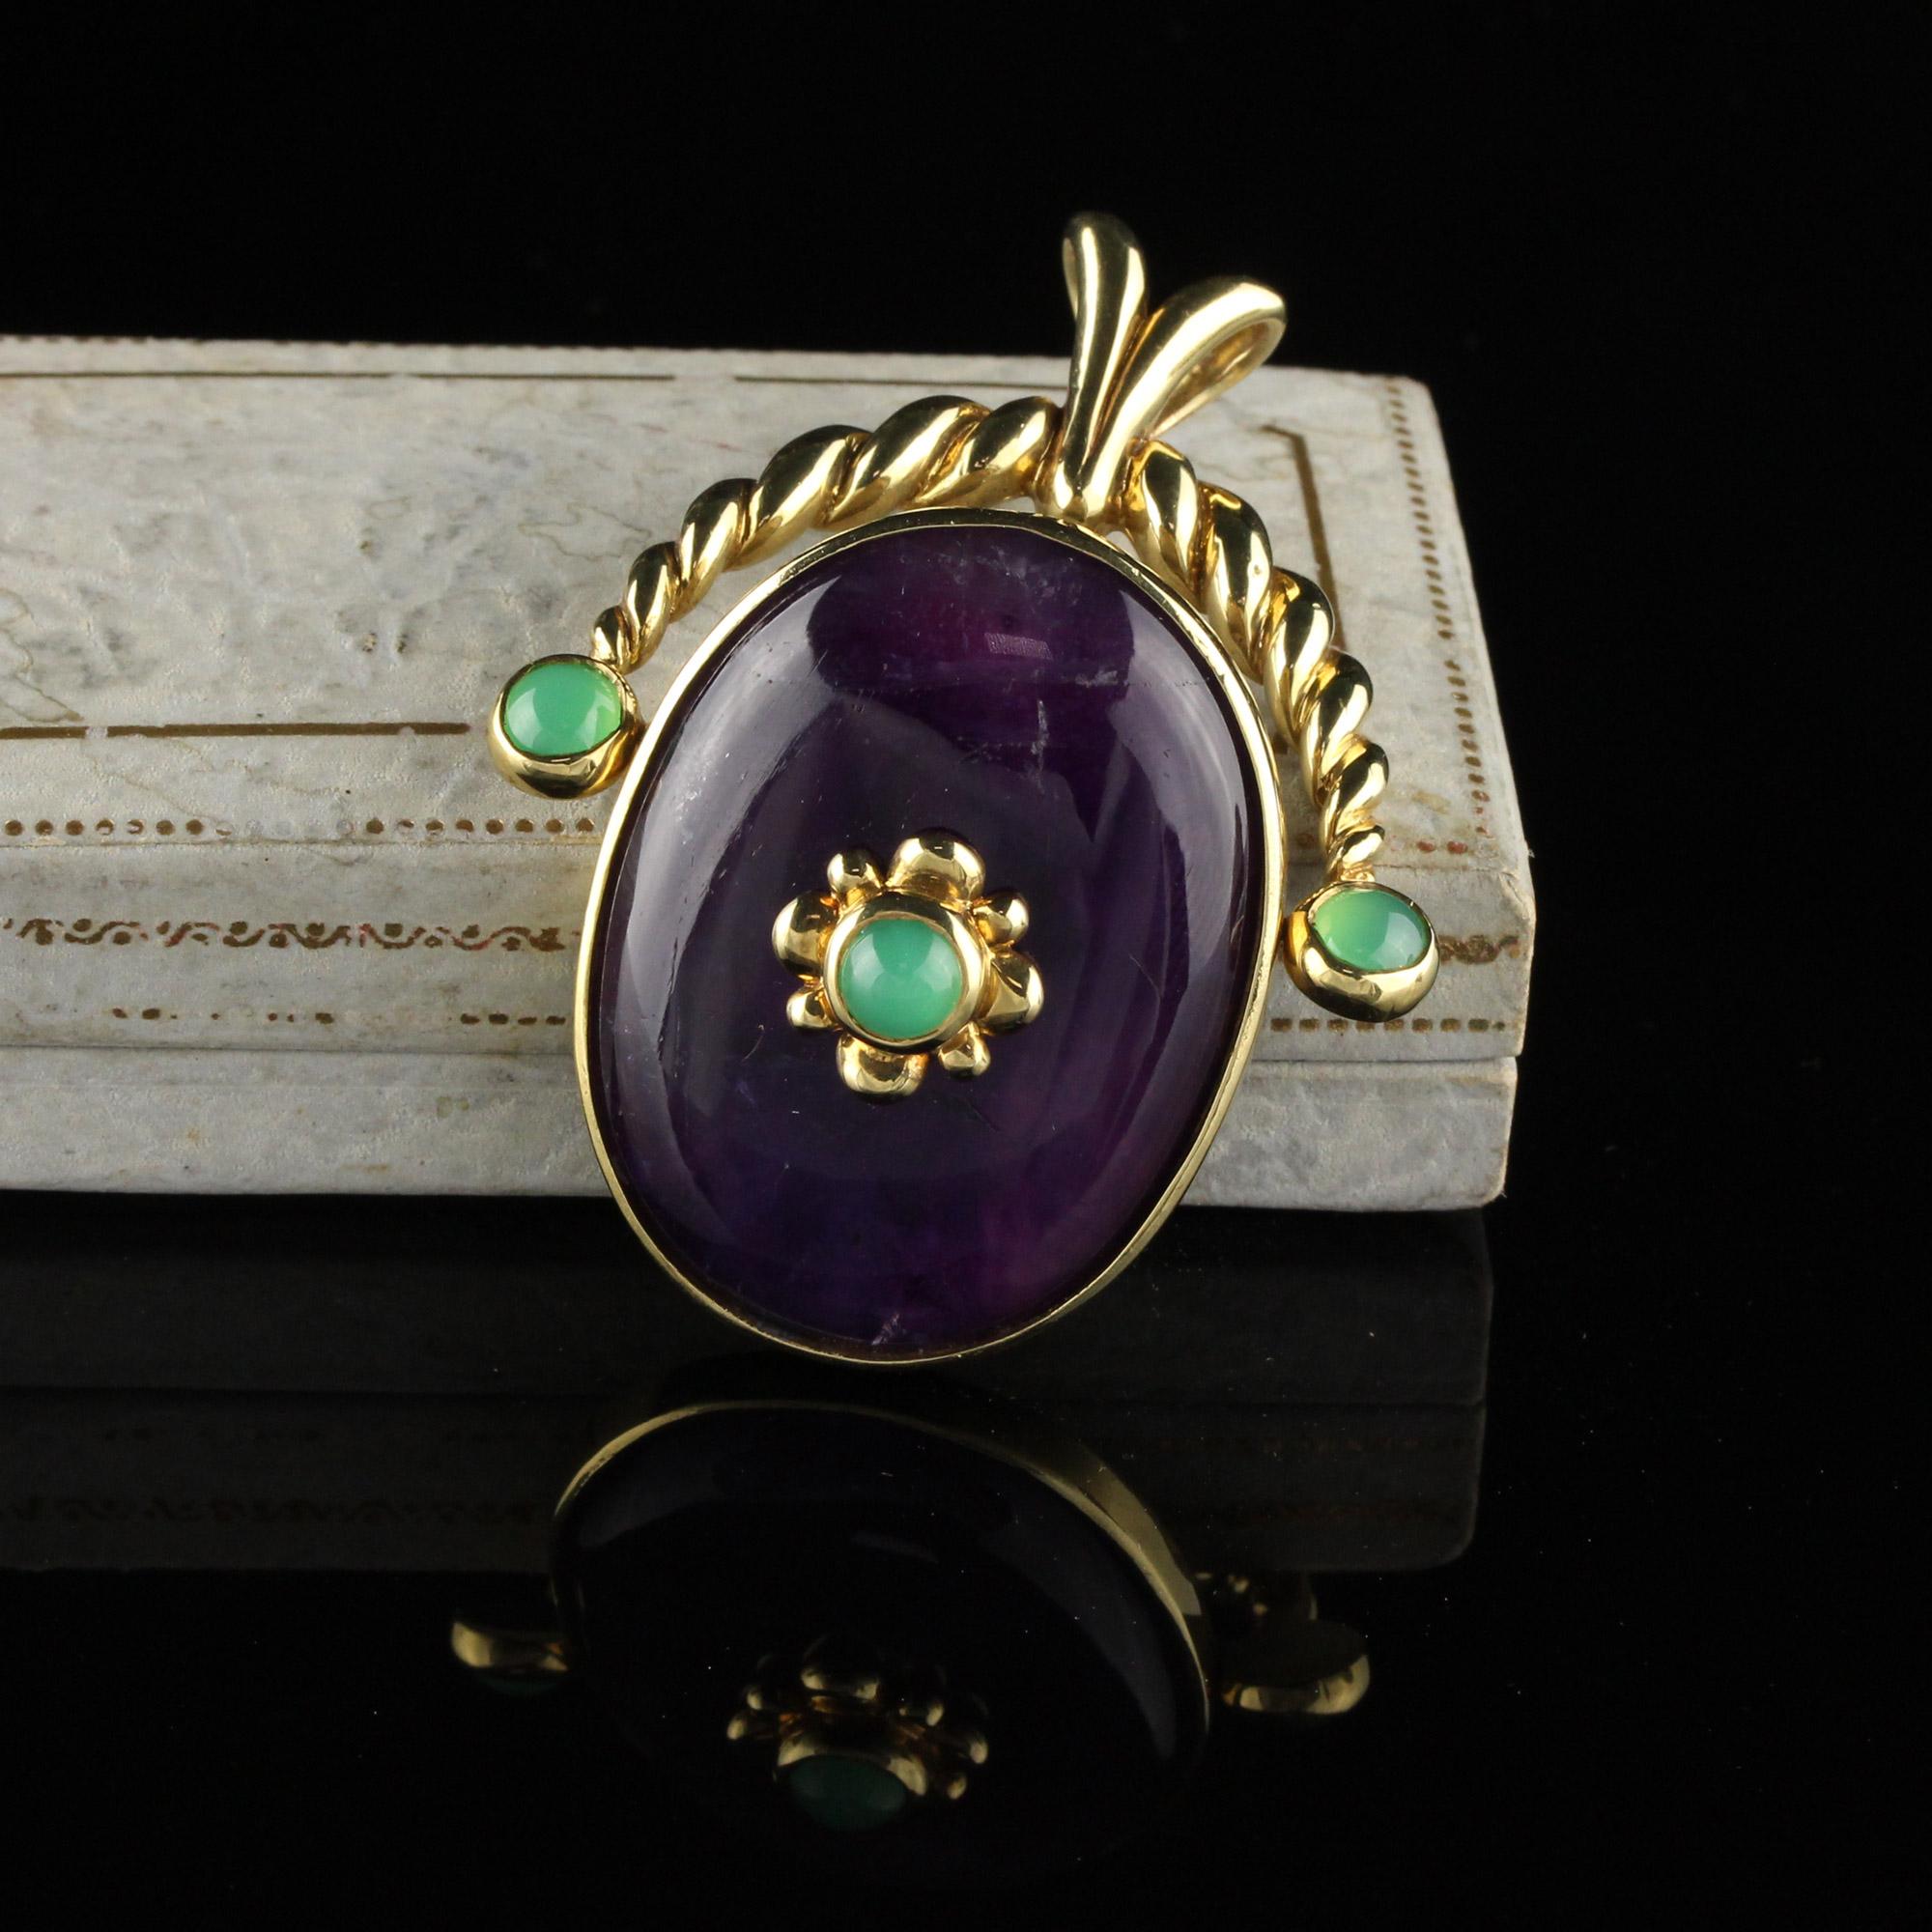 Bold and beautiful amethyst and chrysoprase pendant.

Metal: 14K/18K Yellow Gold

Weight: 38.9 Grams

Measurements: Pendant measures 2.48 x 1.81 inches. No chain included with pendant.